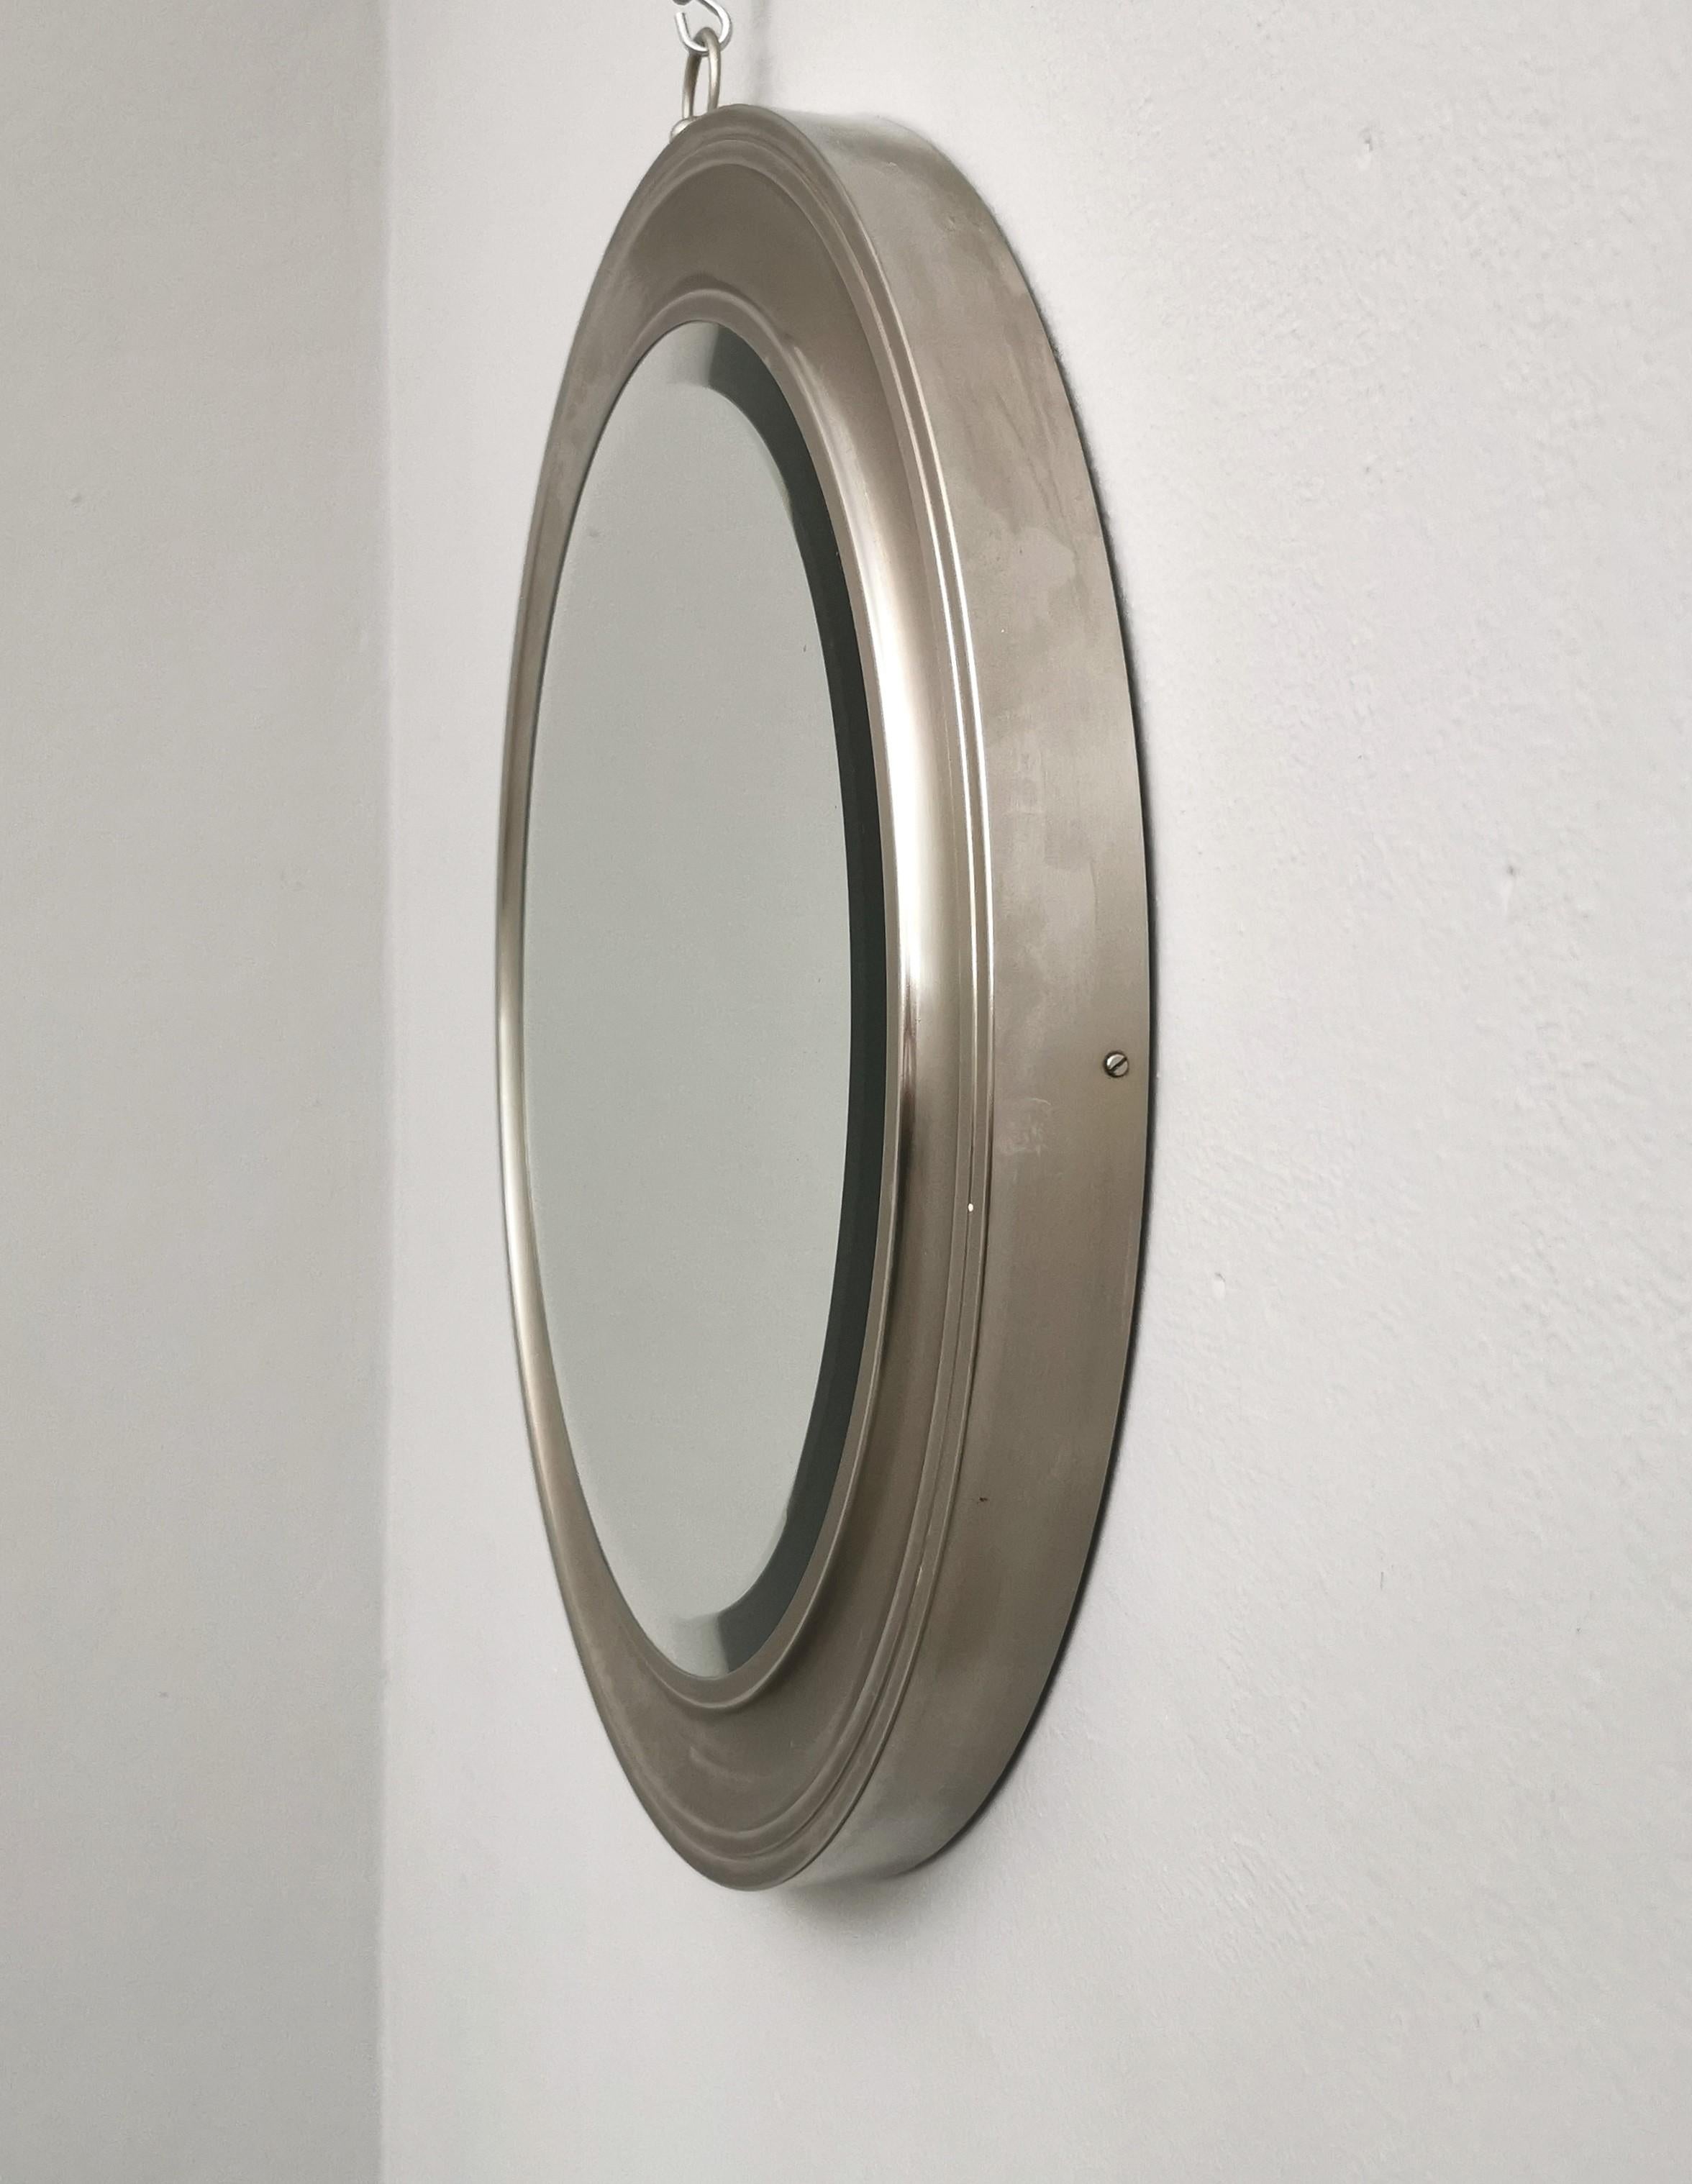 Wall mirror designed by the Italian designer Sergio Mazza and produced in the 60's by his company Artemide. The round-shaped mirror was made entirely of galvanized metal, with a glass in the center with a ground edge that creates a sense of depth.